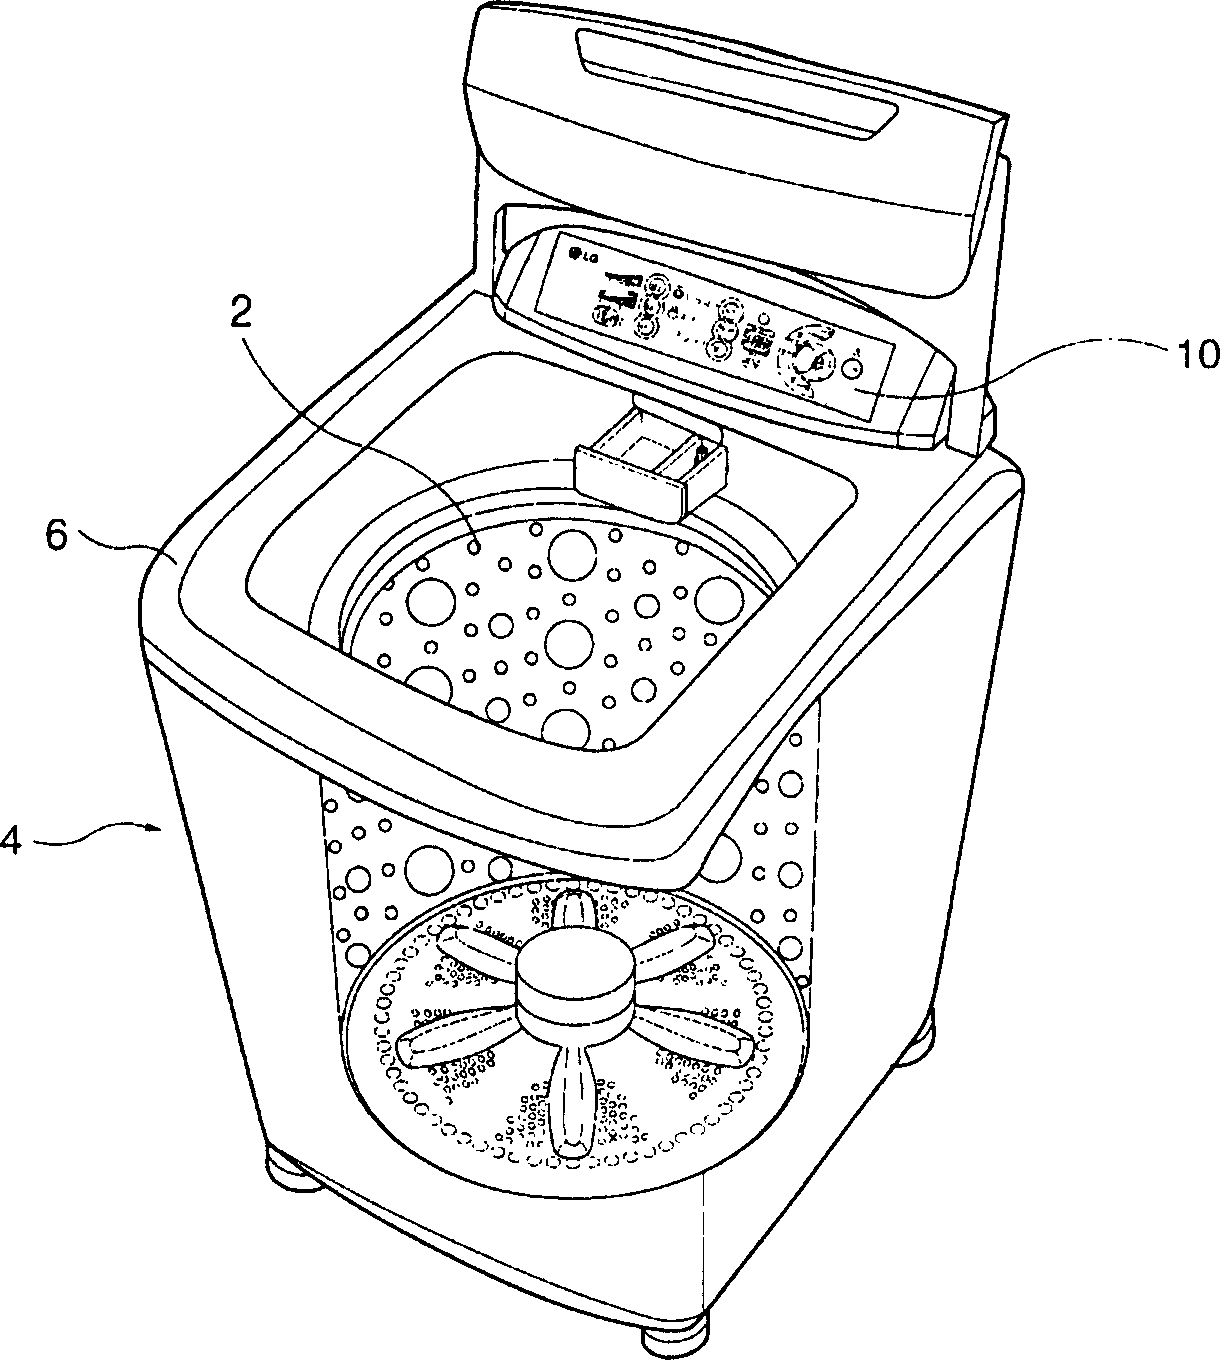 Assembling structure of washing machine display part